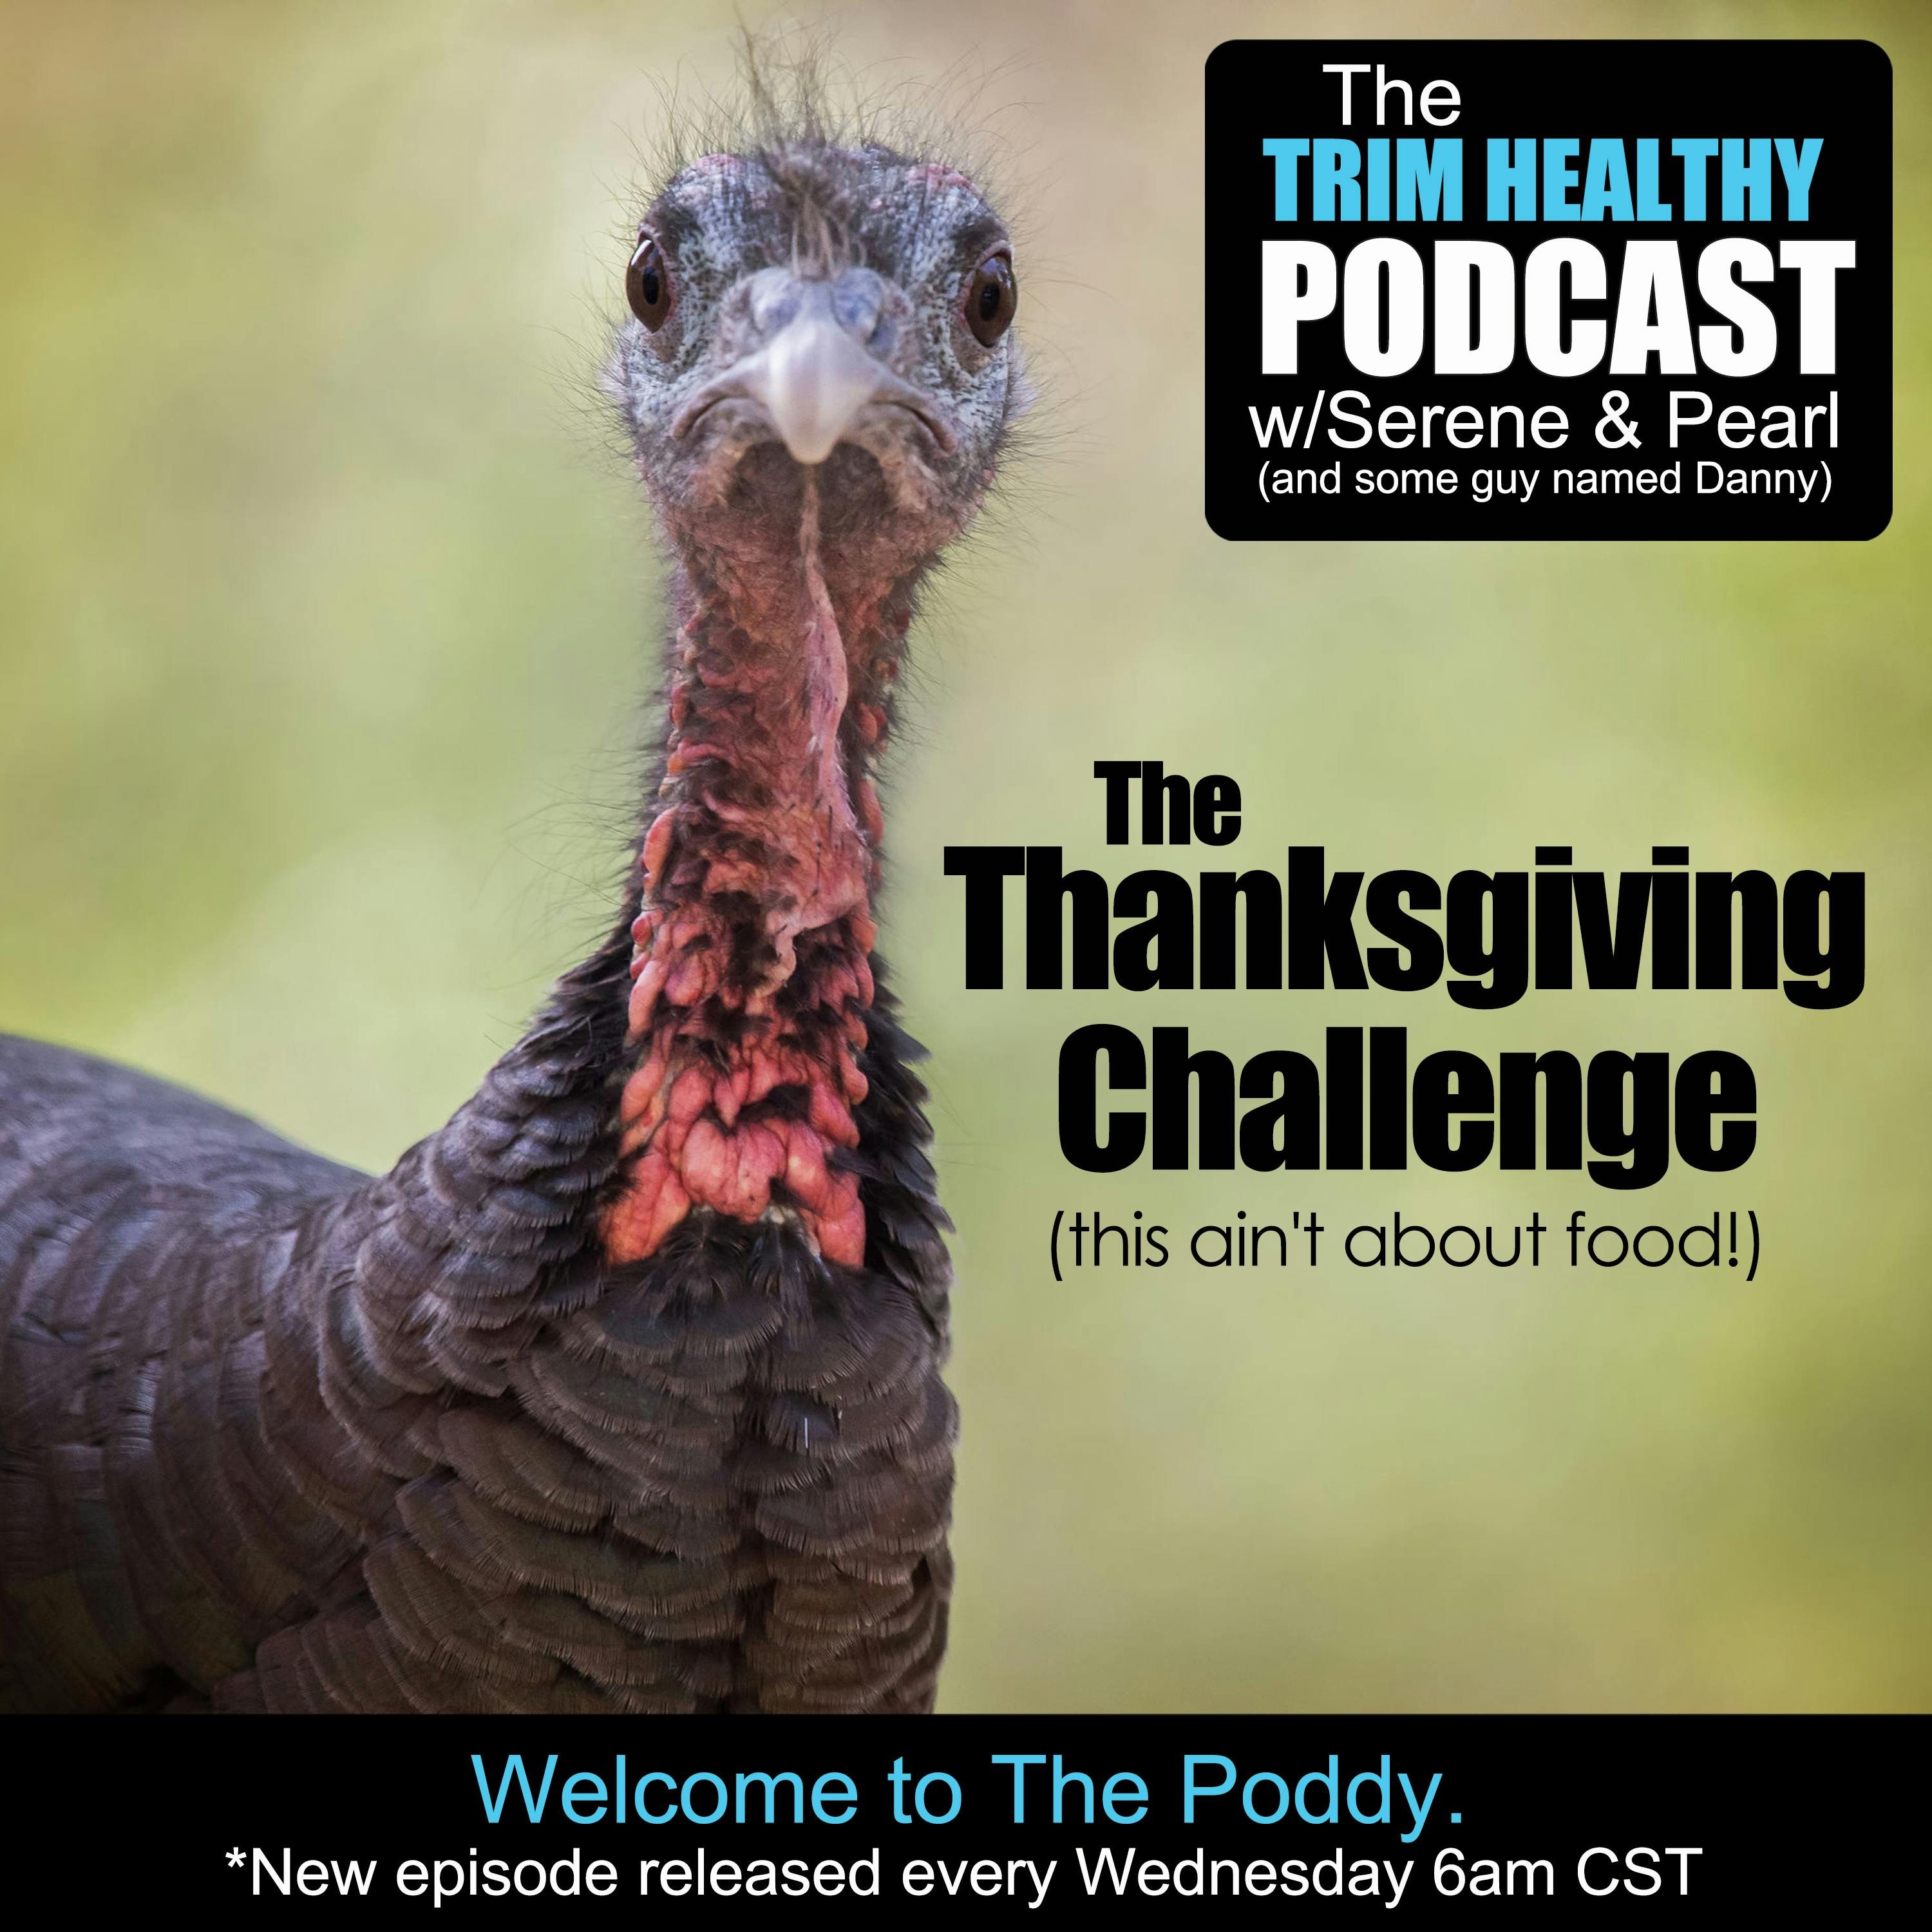 Ep 148: The Thanksgiving Challenge. (this ain't about food!)